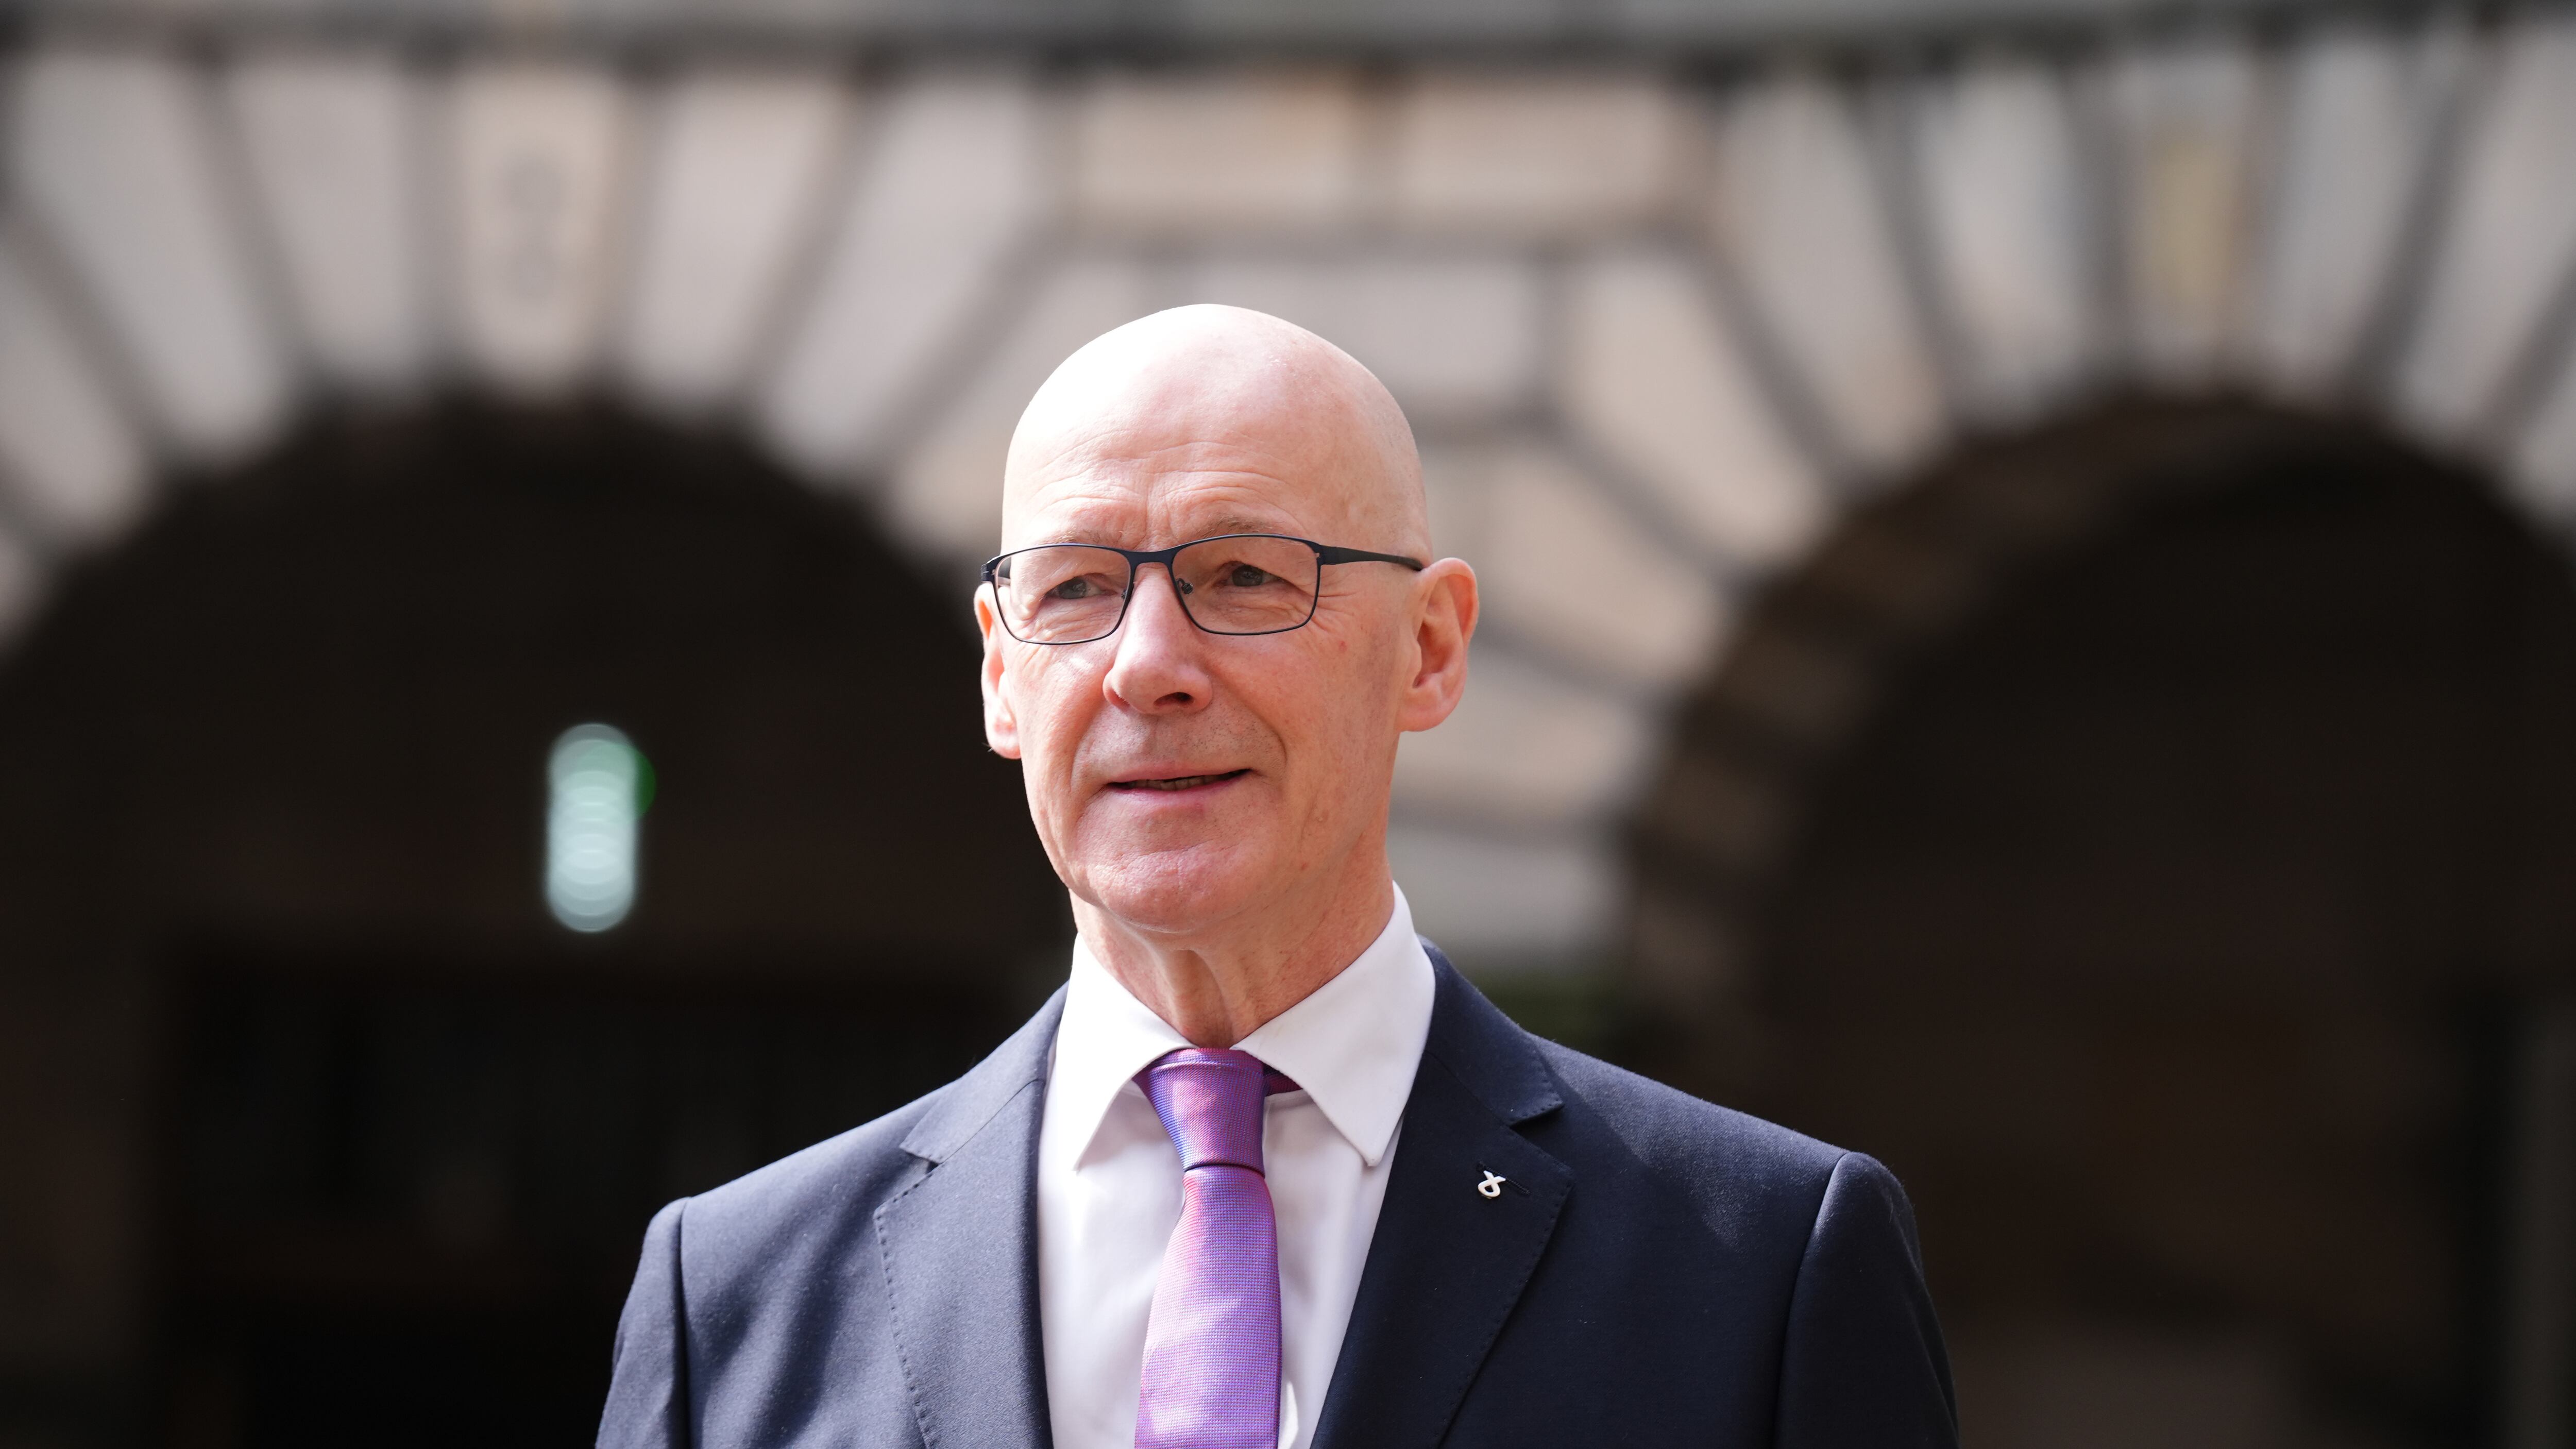 John Swinney’s Cabinet has been approved in a vote at Holyrood